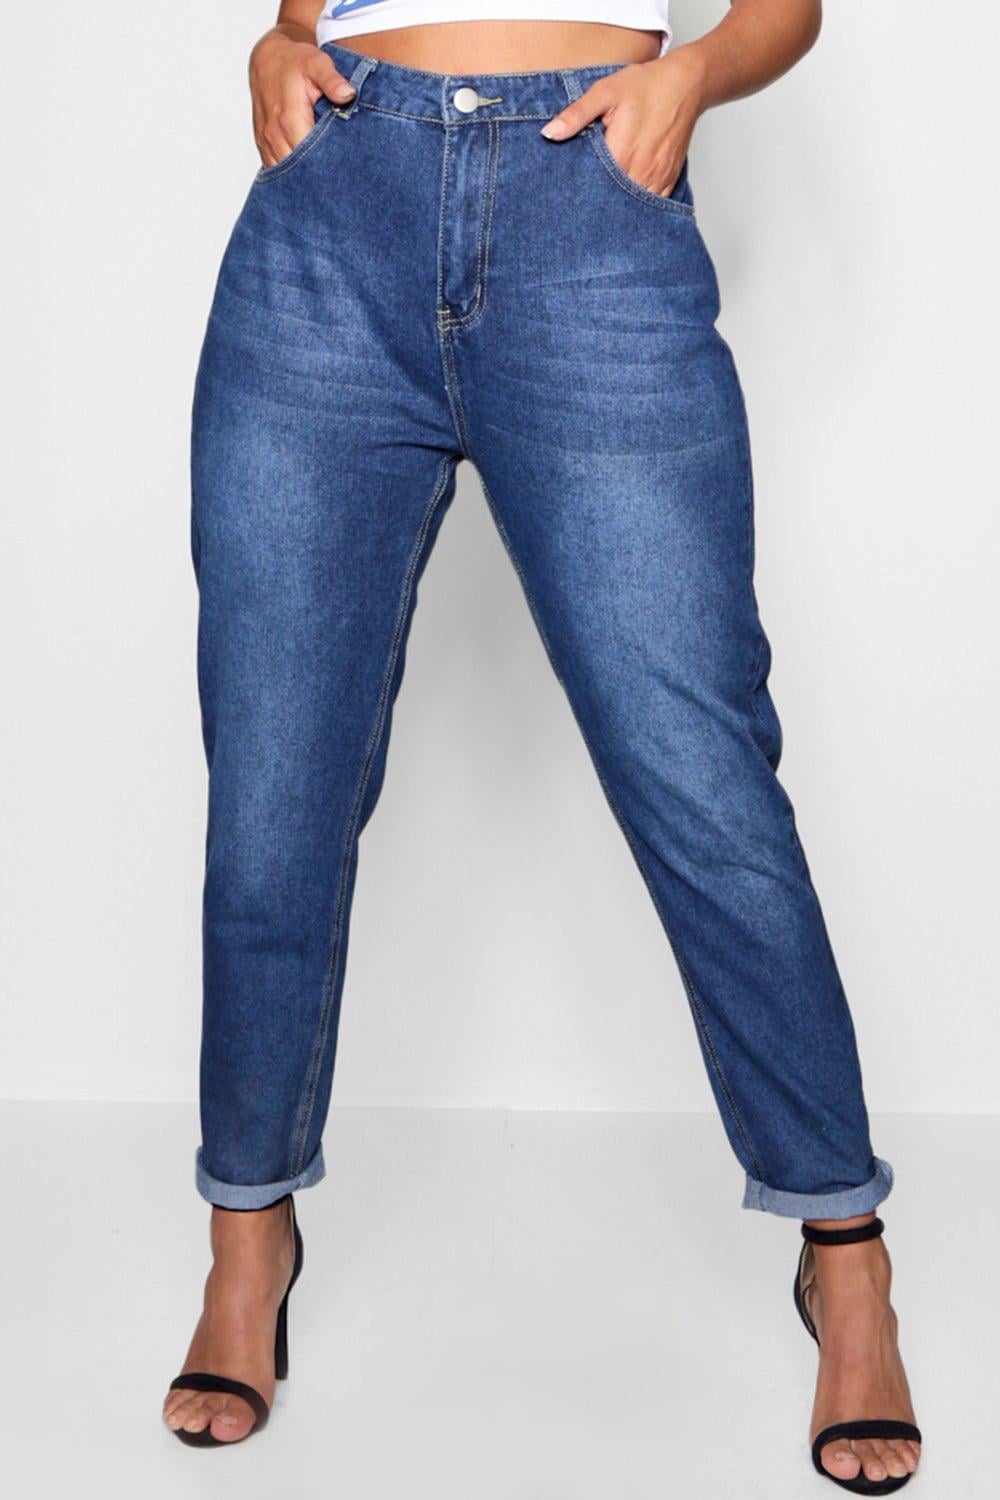 women's jeans for curvy figures